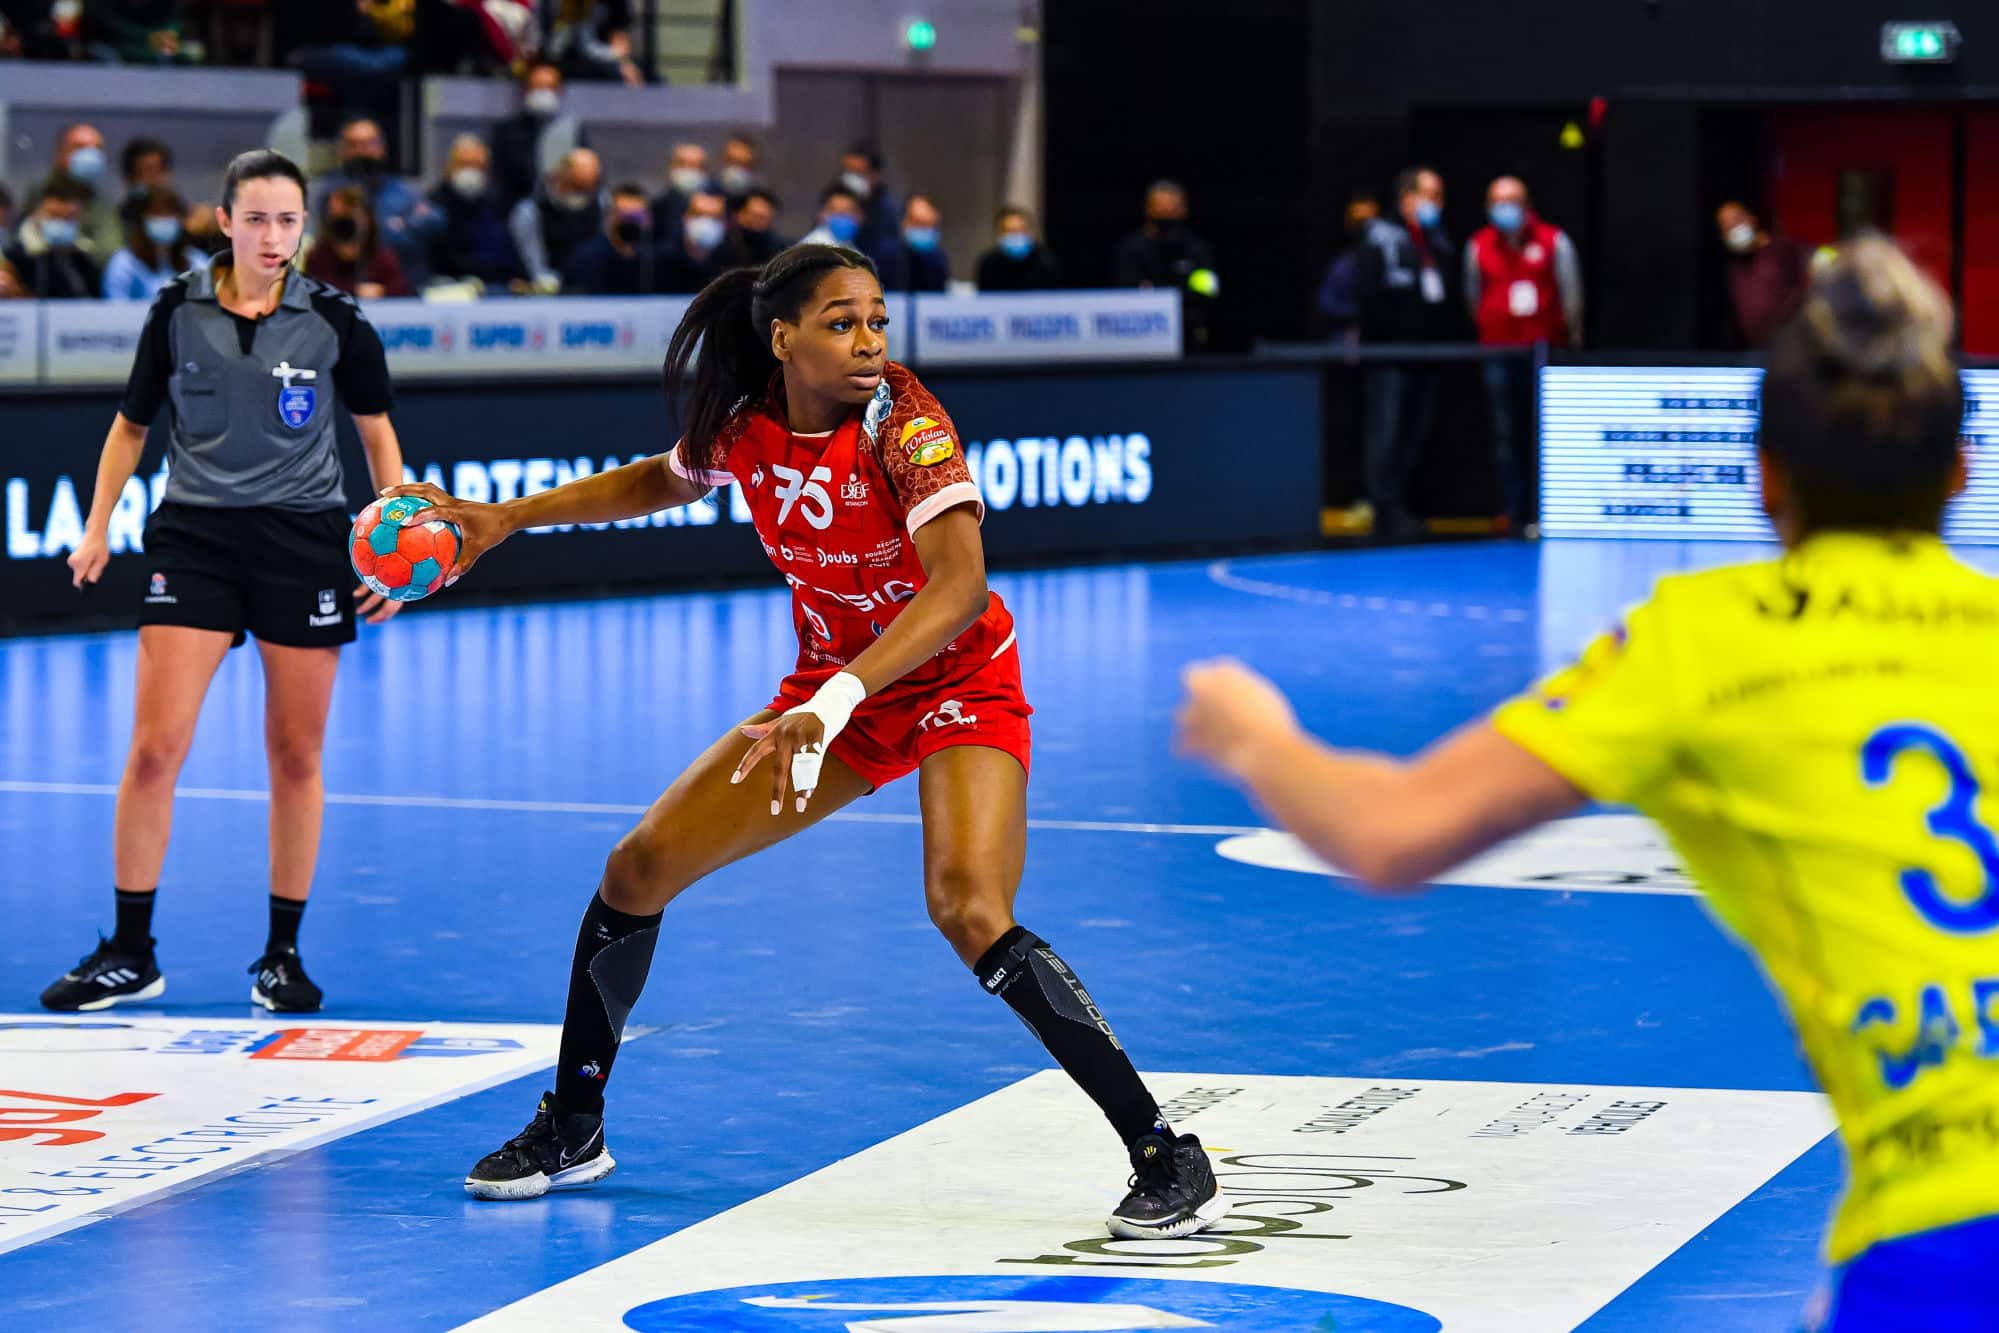 Audrey DEMBELE of Besancon during the French Ligue Butagaz Energie women’s handball match between Besancon and Metz on February 2, 2022 in Besancon, France. (Photo by Baptiste Fernandez/Icon Sport)